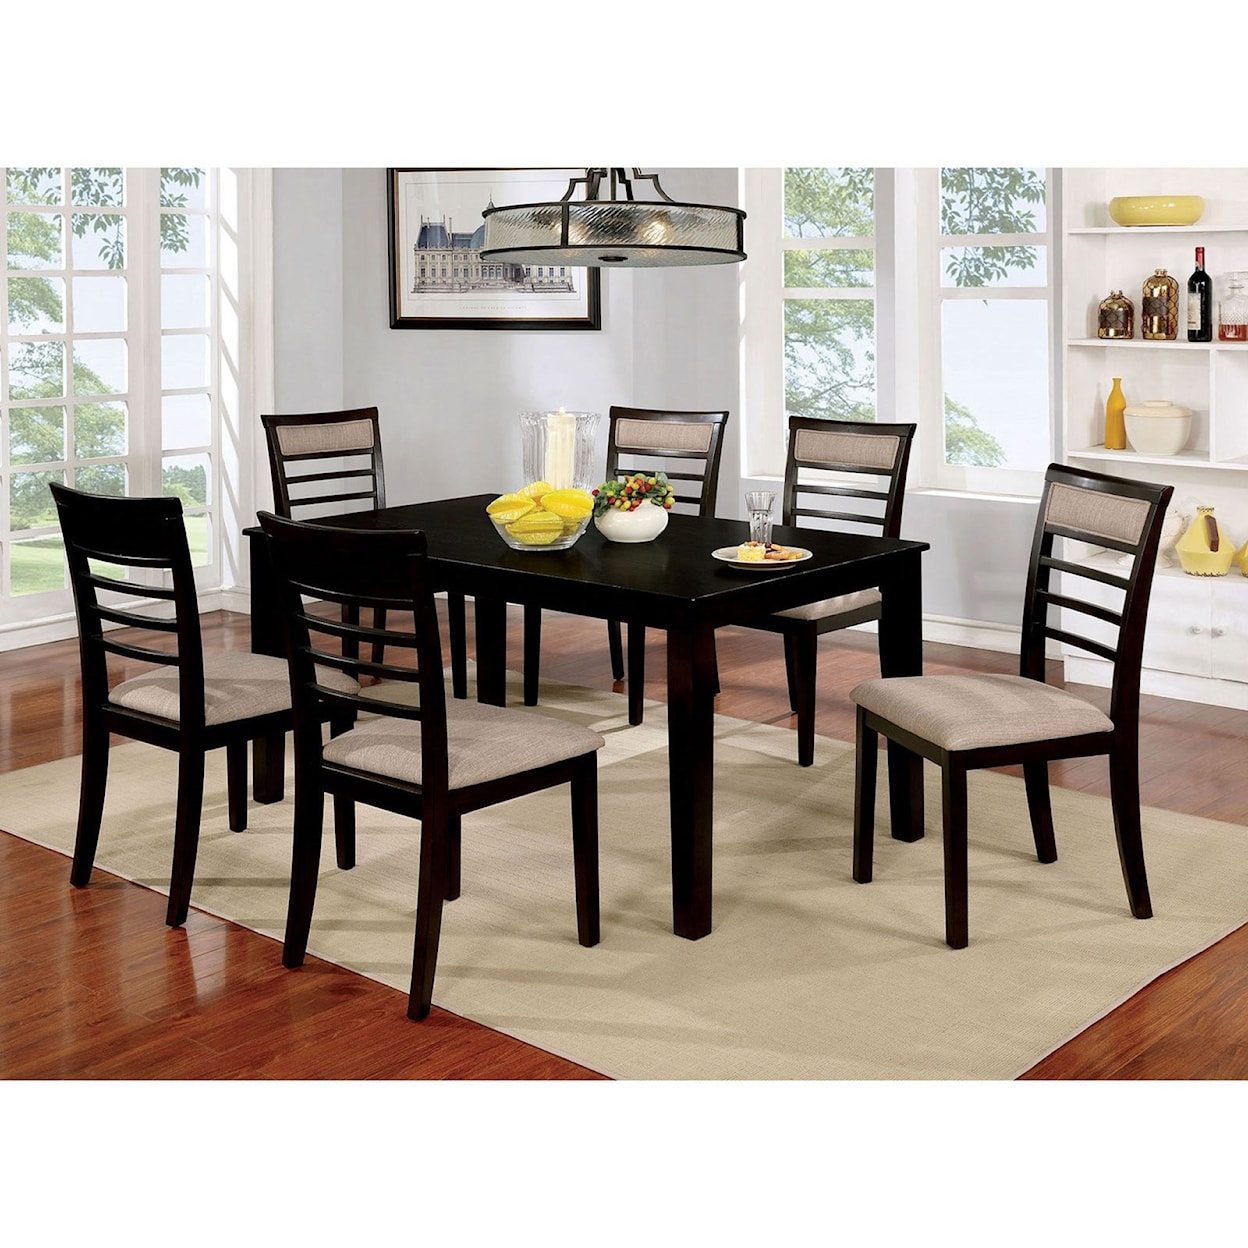 Furniture of America - FOA Fafnir 7 Piece Table and Chair Set